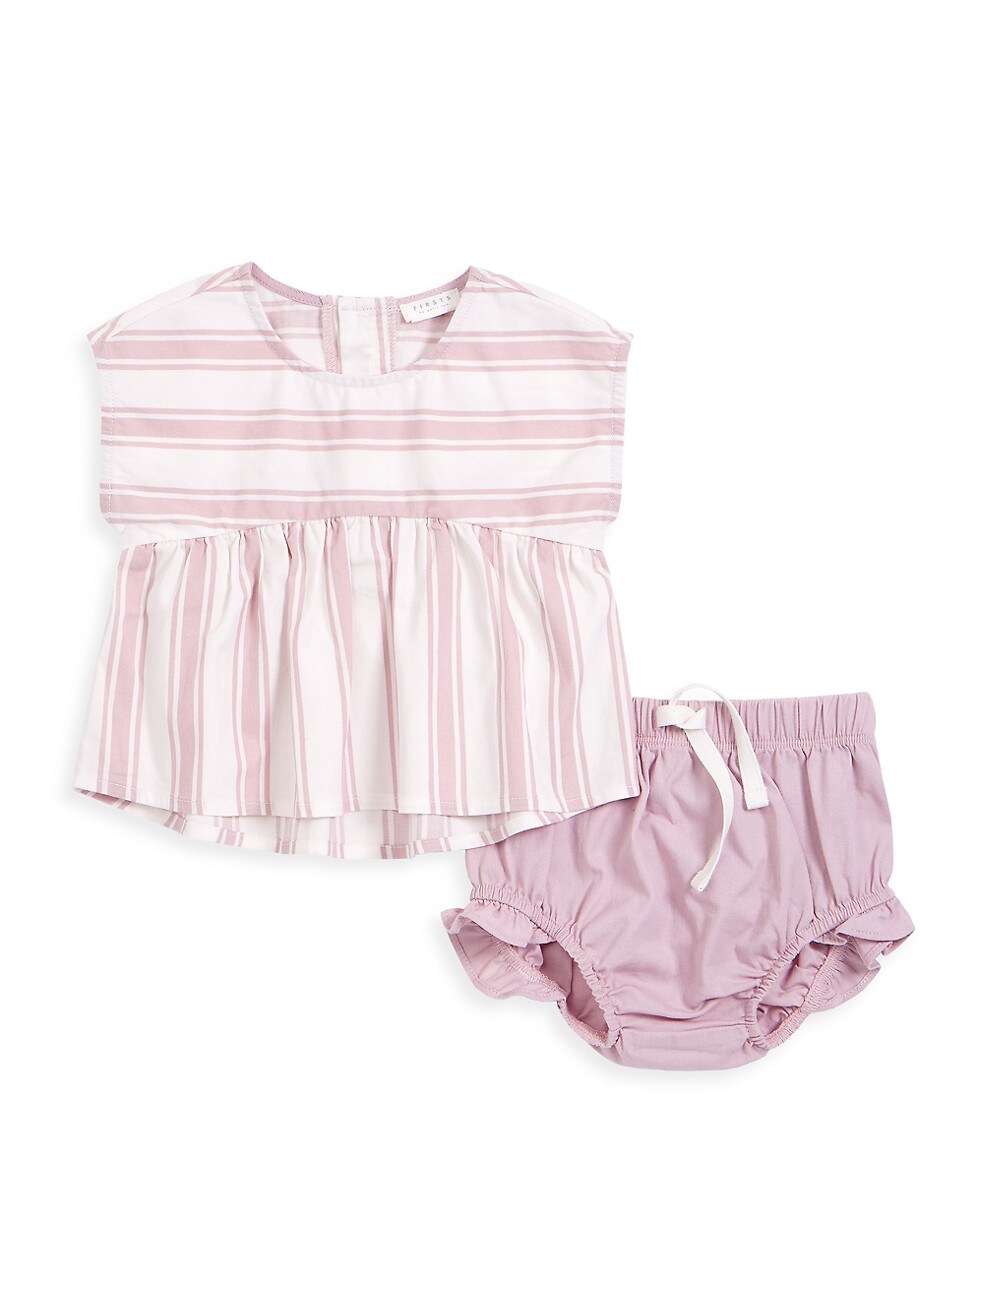 BABY 2PC SET: S/S TOP + BLOOMER WOVEN